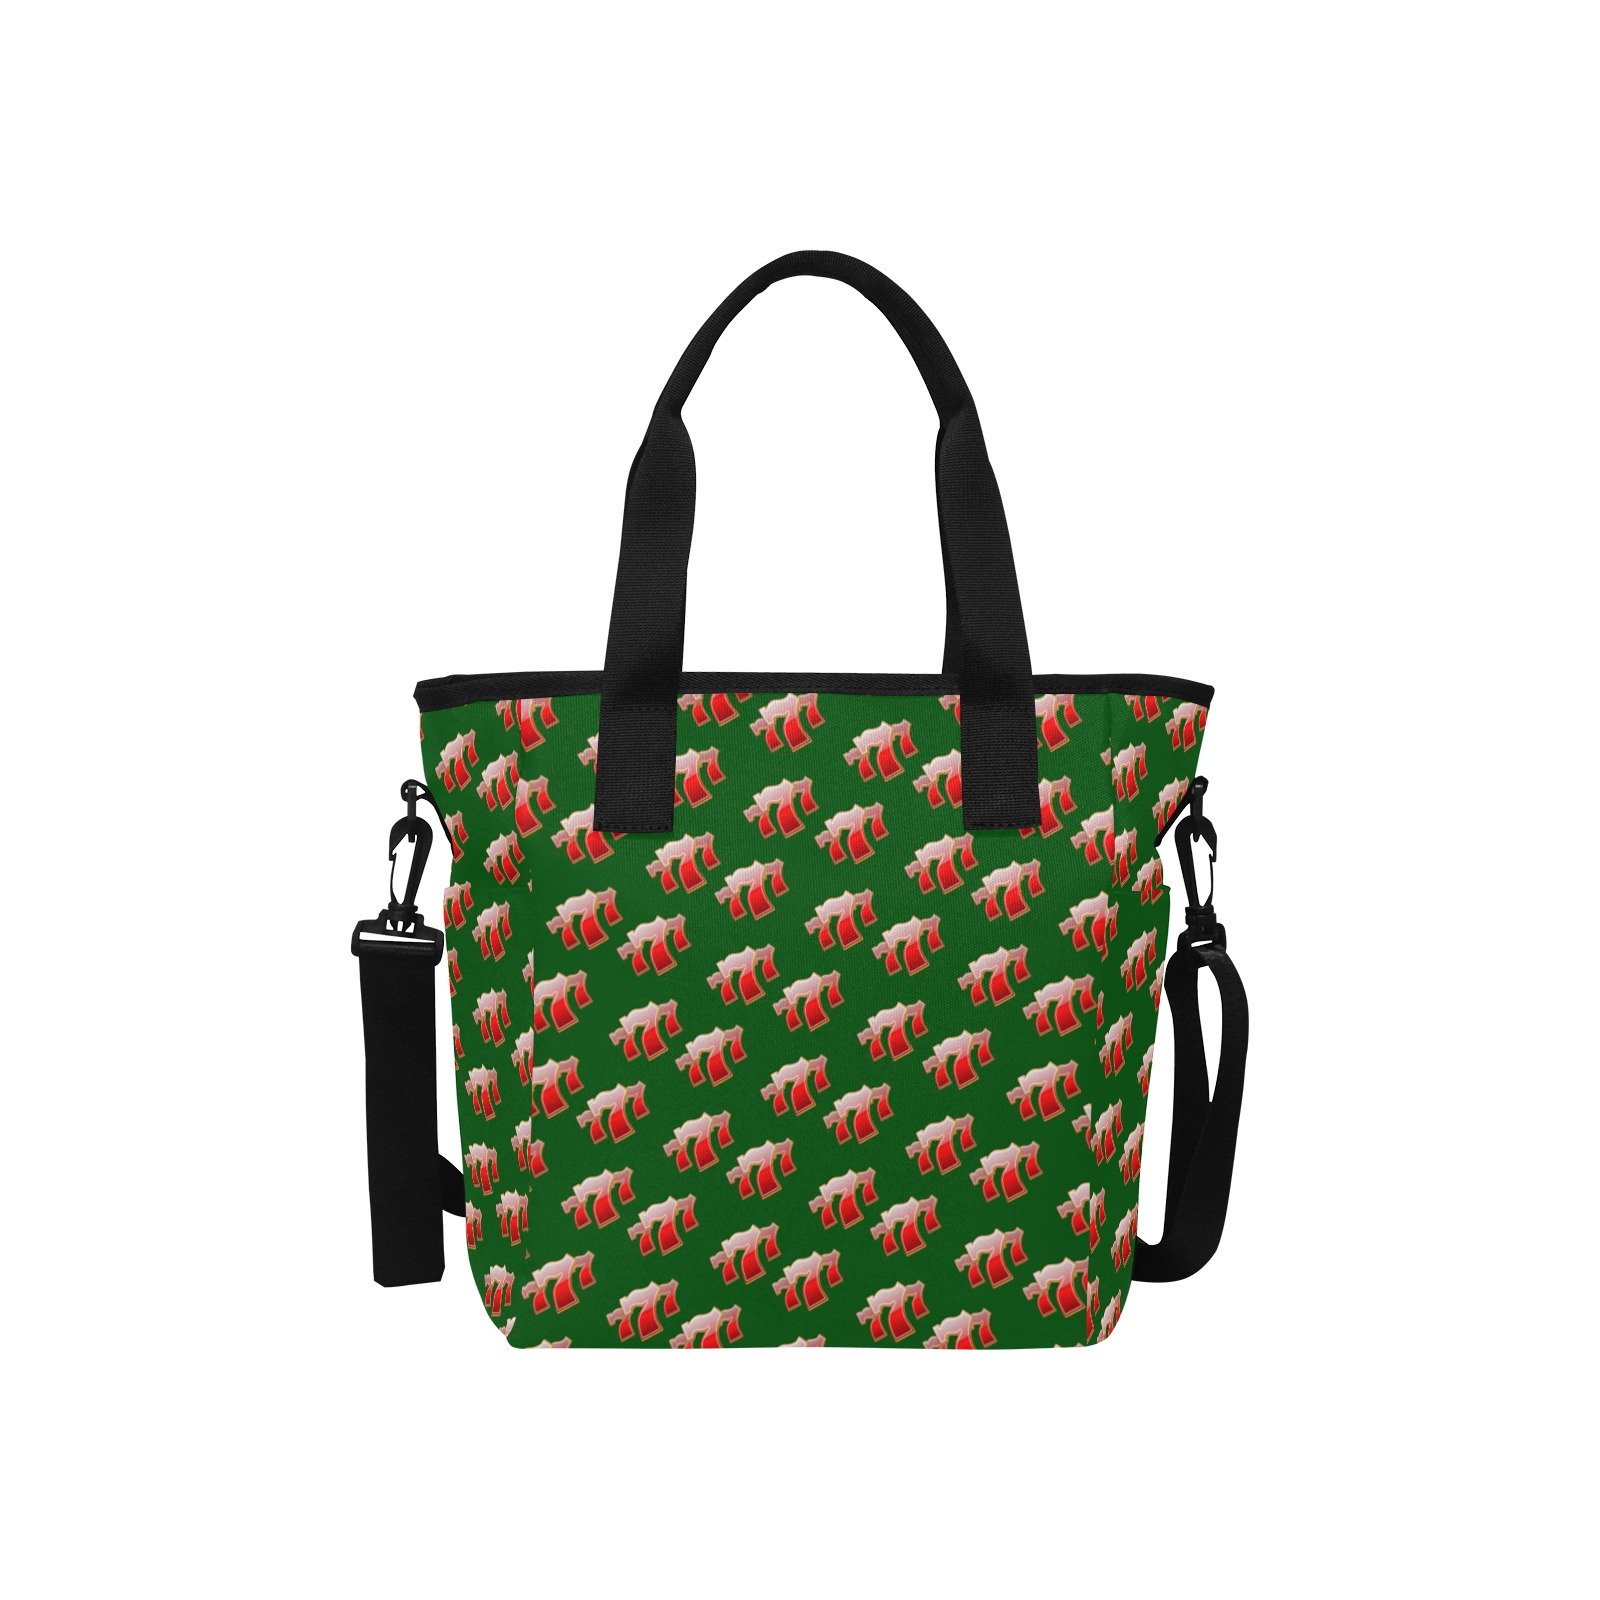 Las Vegas Sevens 777 / Green Insulated Tote Bag with Shoulder Strap (Model 1724)